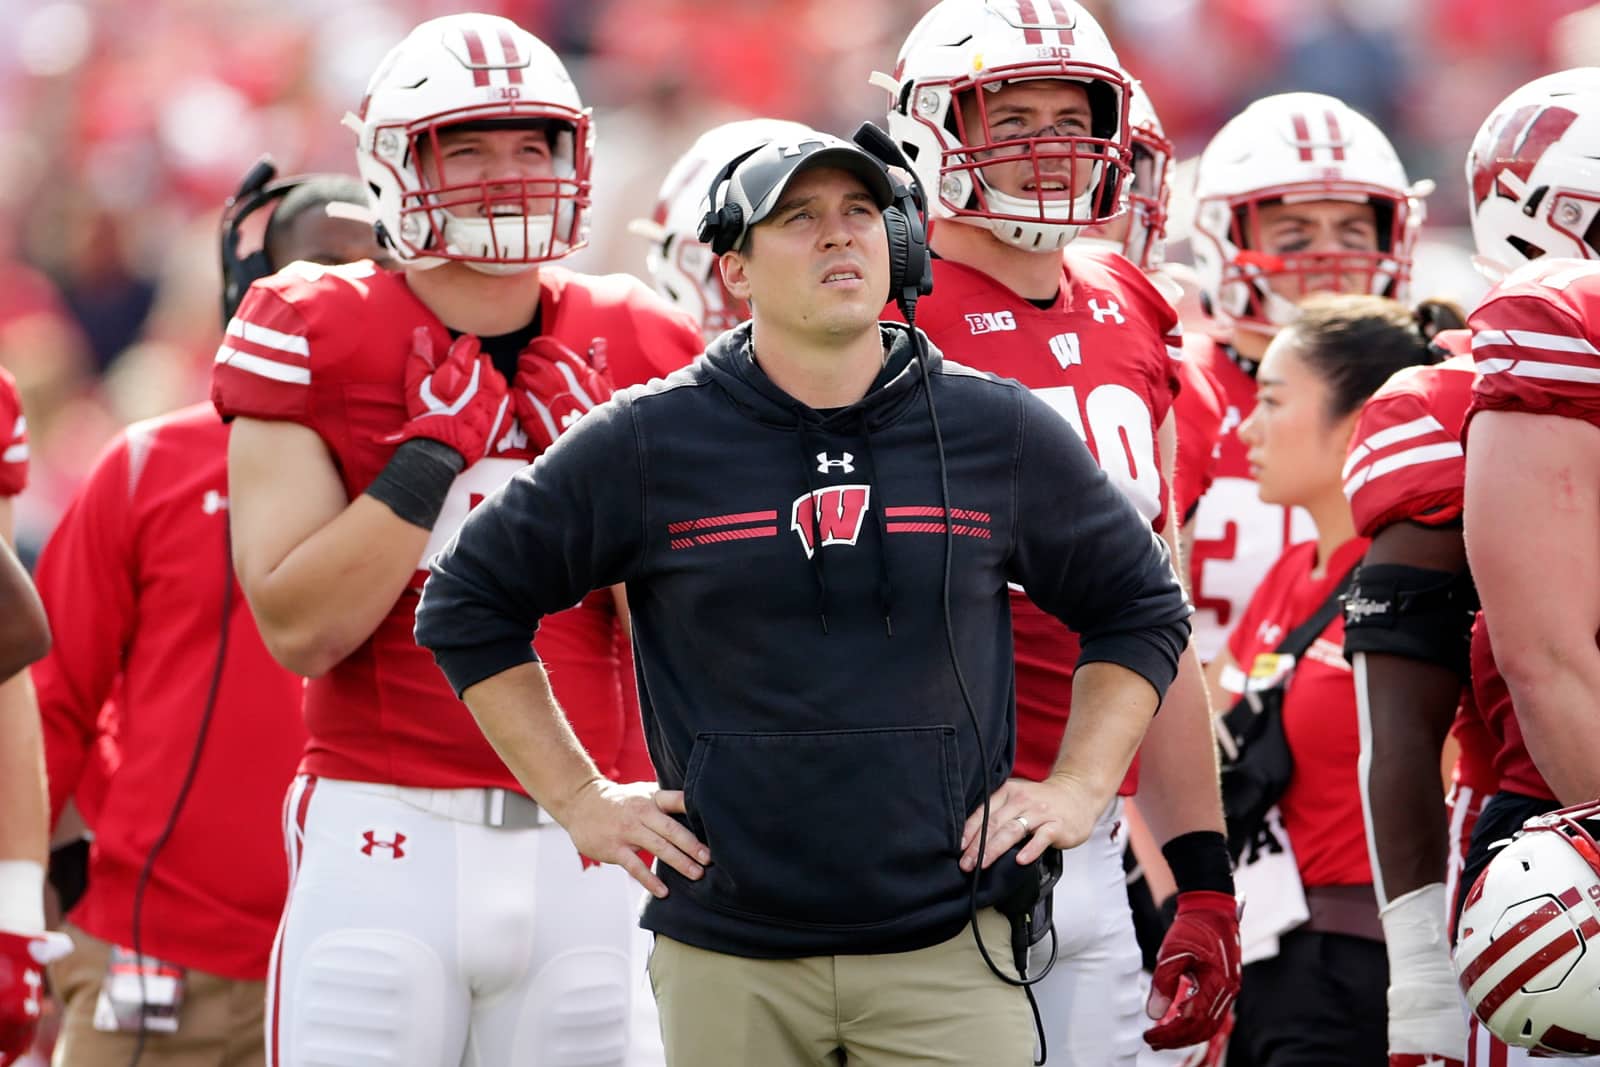 5 Potential Head Coaches for the Wisconsin Badgers